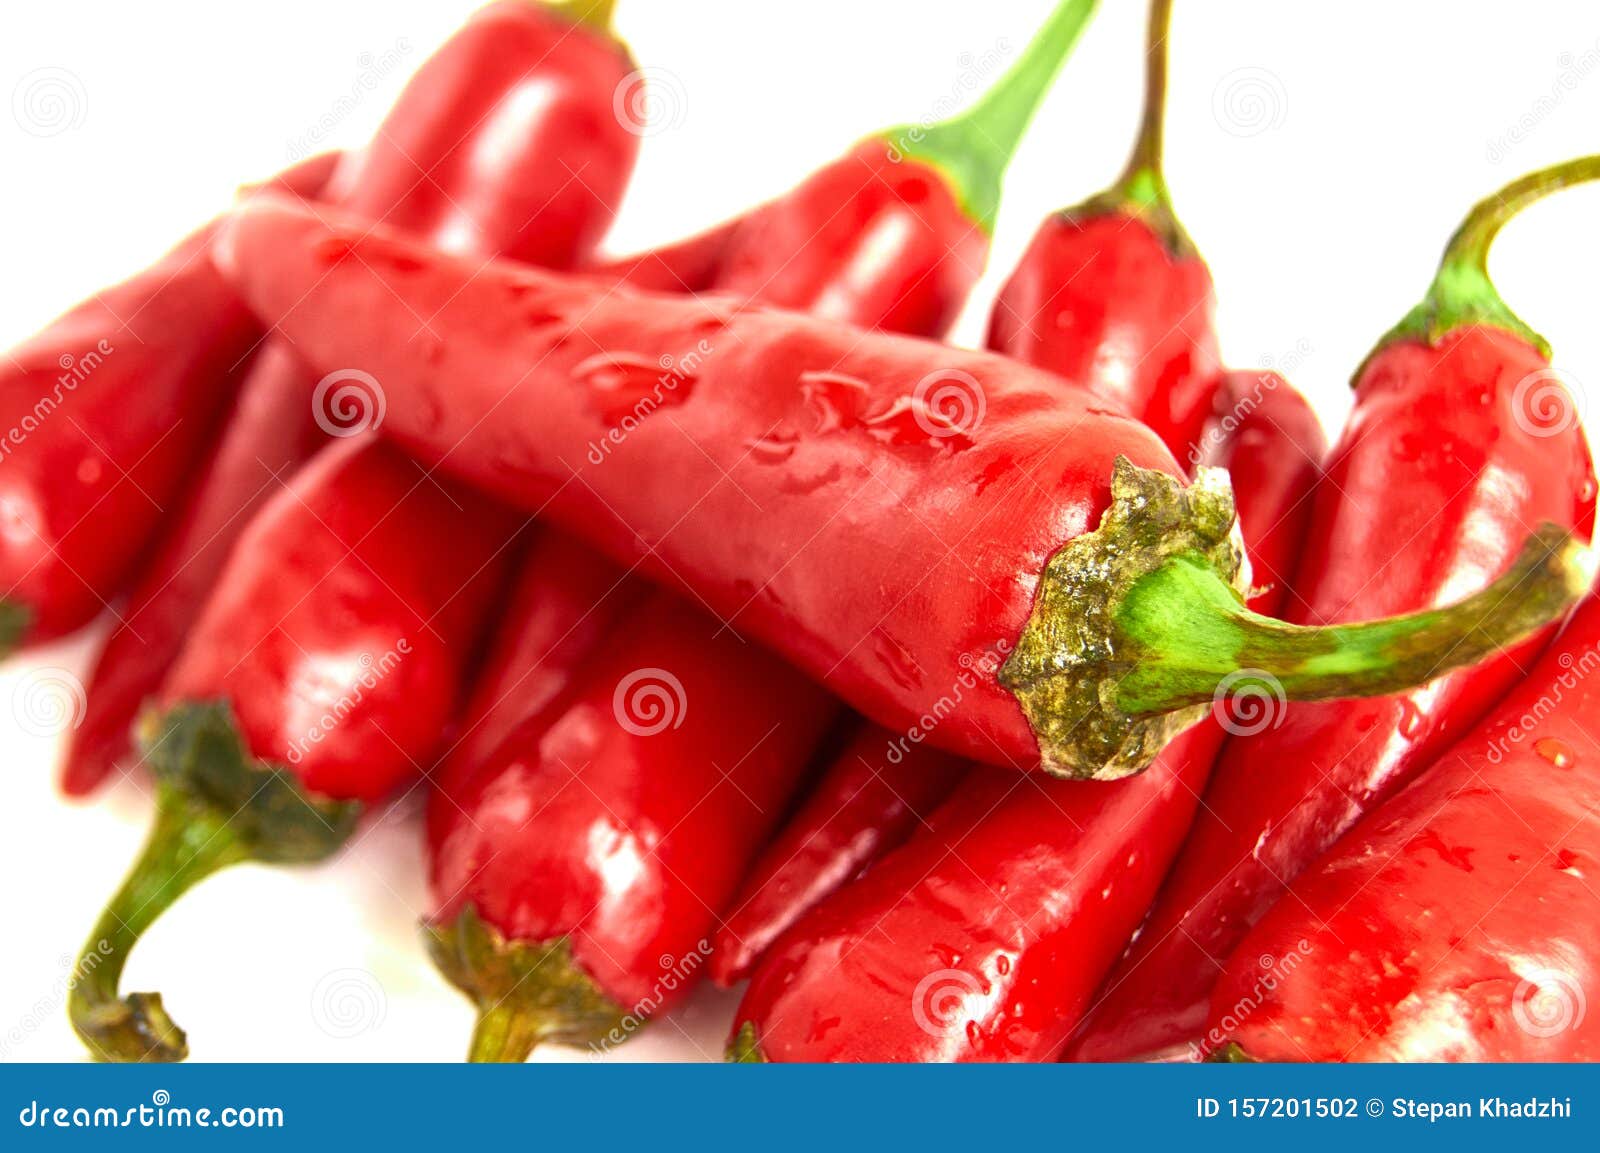 red chili pepper.  on white background